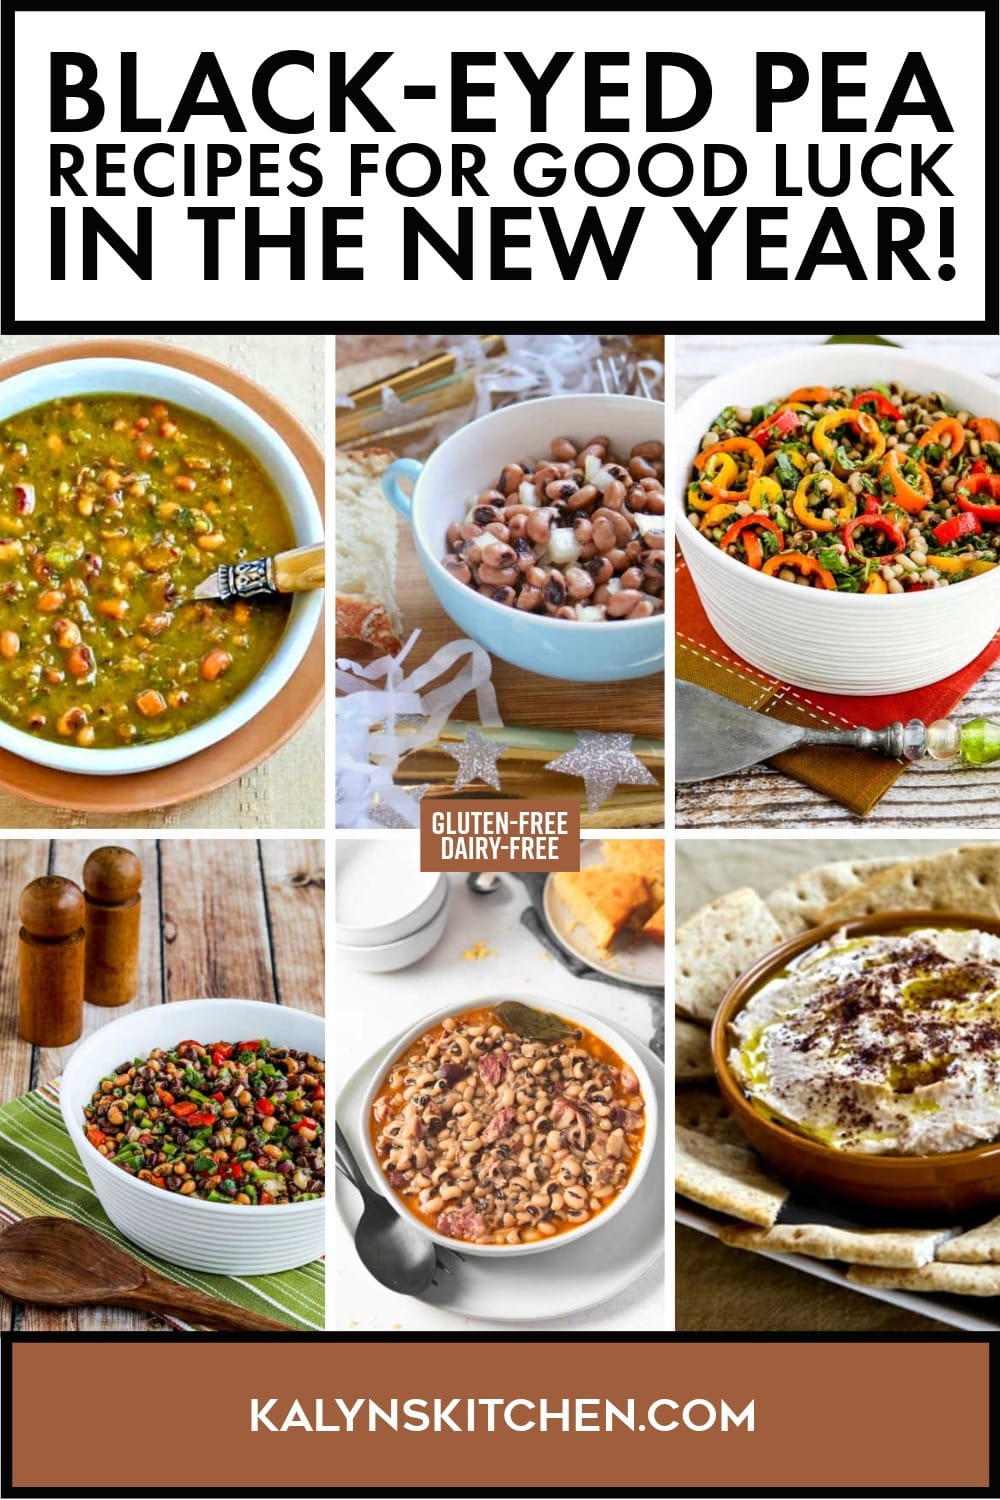 Pinterest image of Black-Eyed Pea Recipes for Good Luck in the New Year!